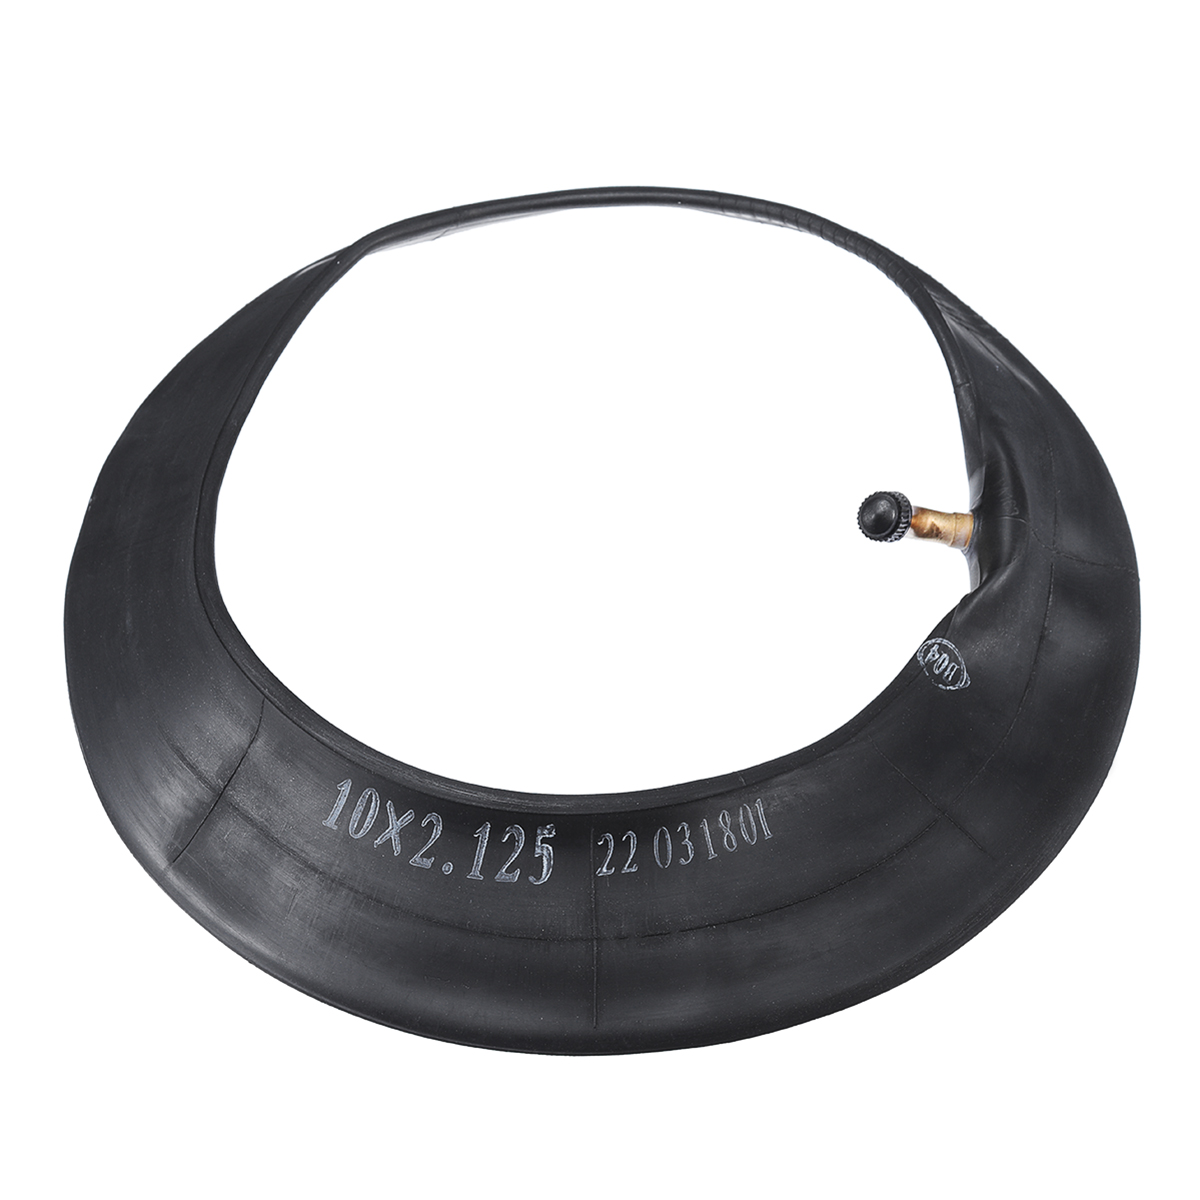 

BIKIGHT 10''x2'' Universal Butyl Rubber Pneumatic Scooter Inner Tube For Electric Scooter Pram Wheel Chair